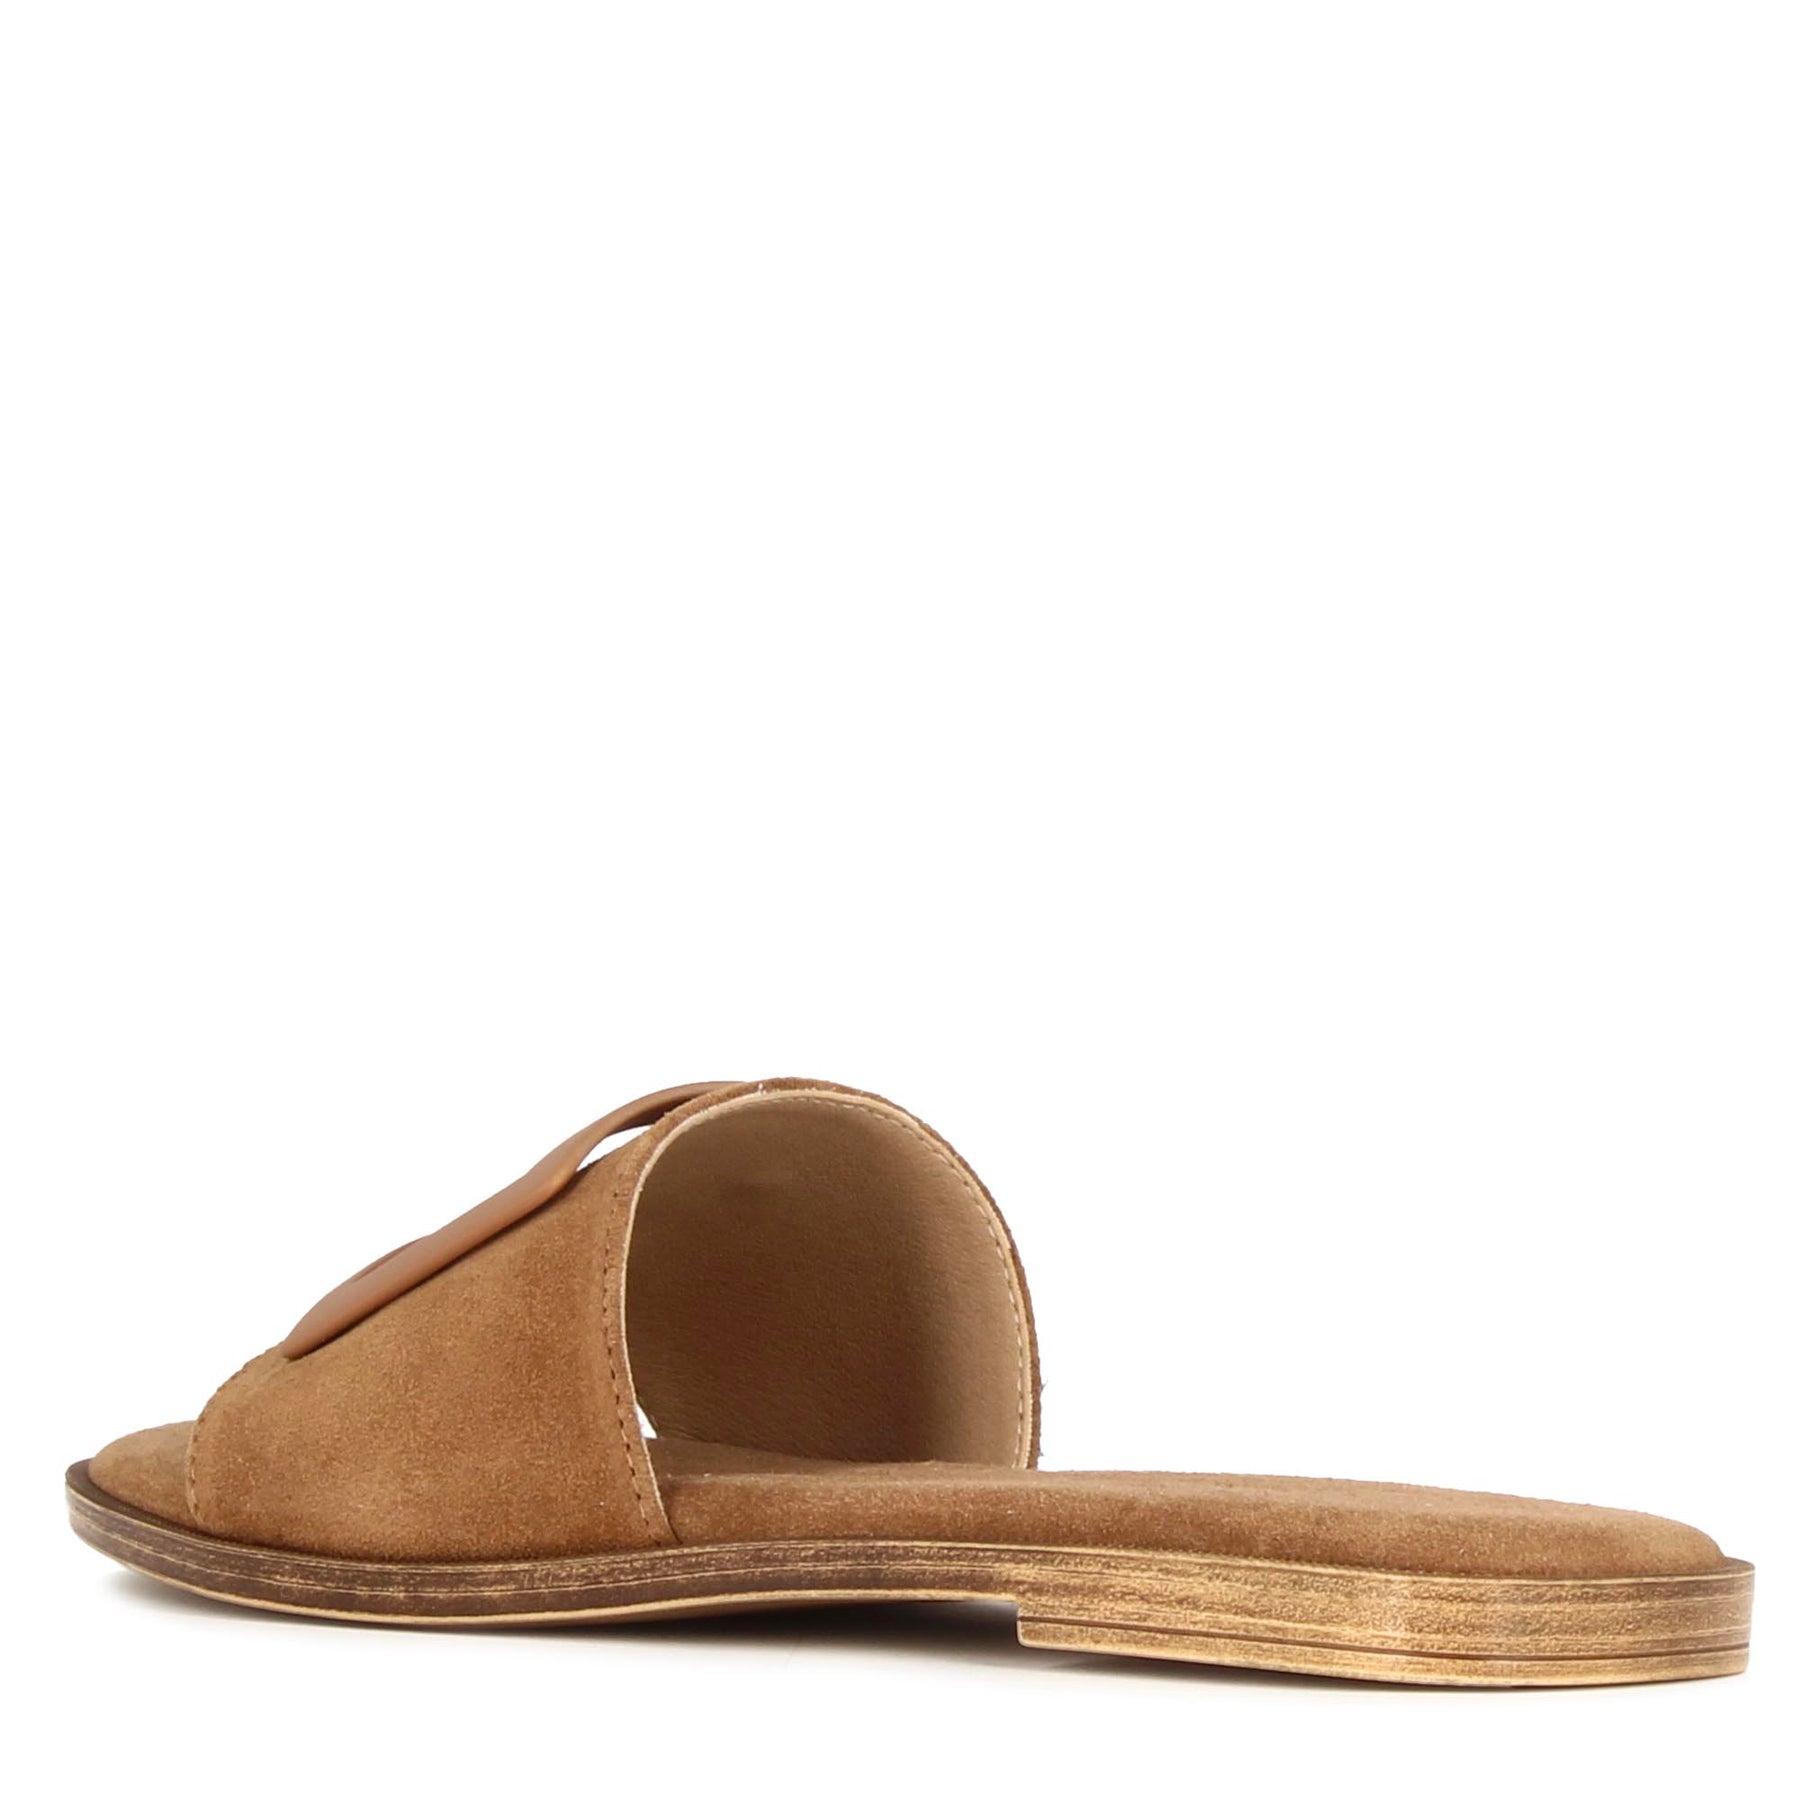 Women's suede slippers with light brown band